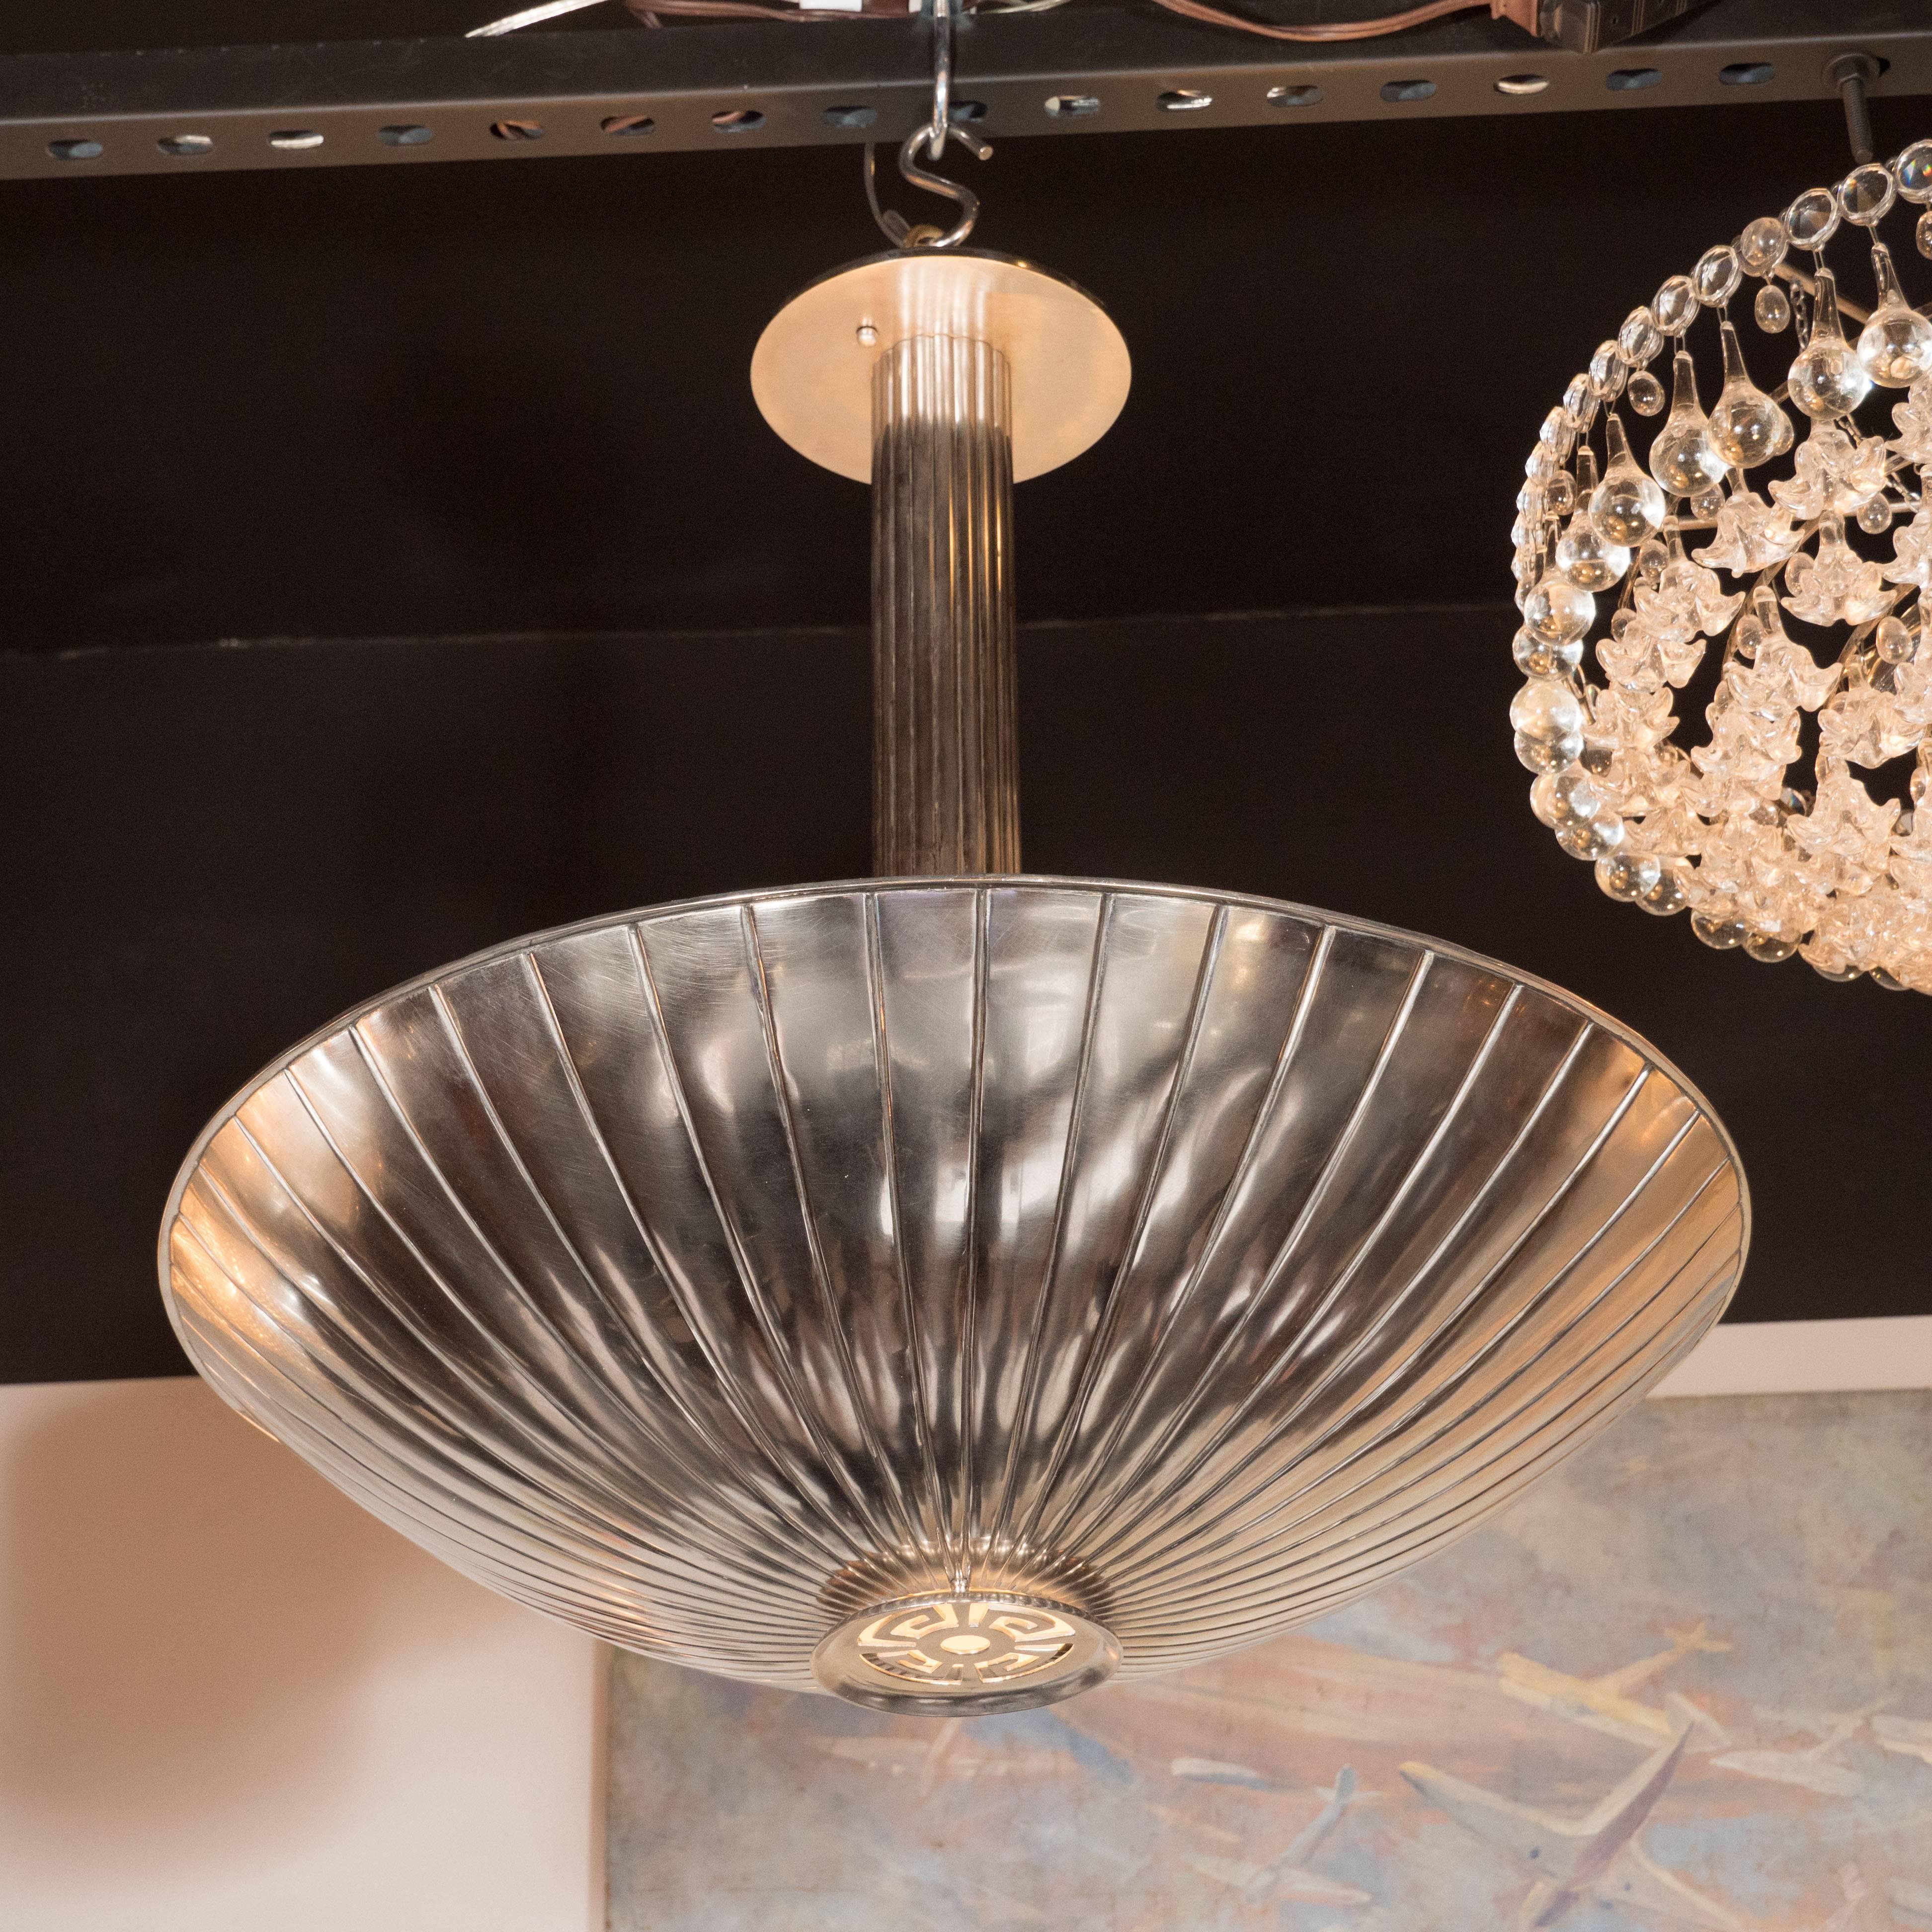 This American Art Deco combines the best of Machine Age and classical design. It features a domed nickel shade with a circular inset suggesting deconstructed Greek keys. Striated rays, chased into the nickel, outwards from this central cutout, like